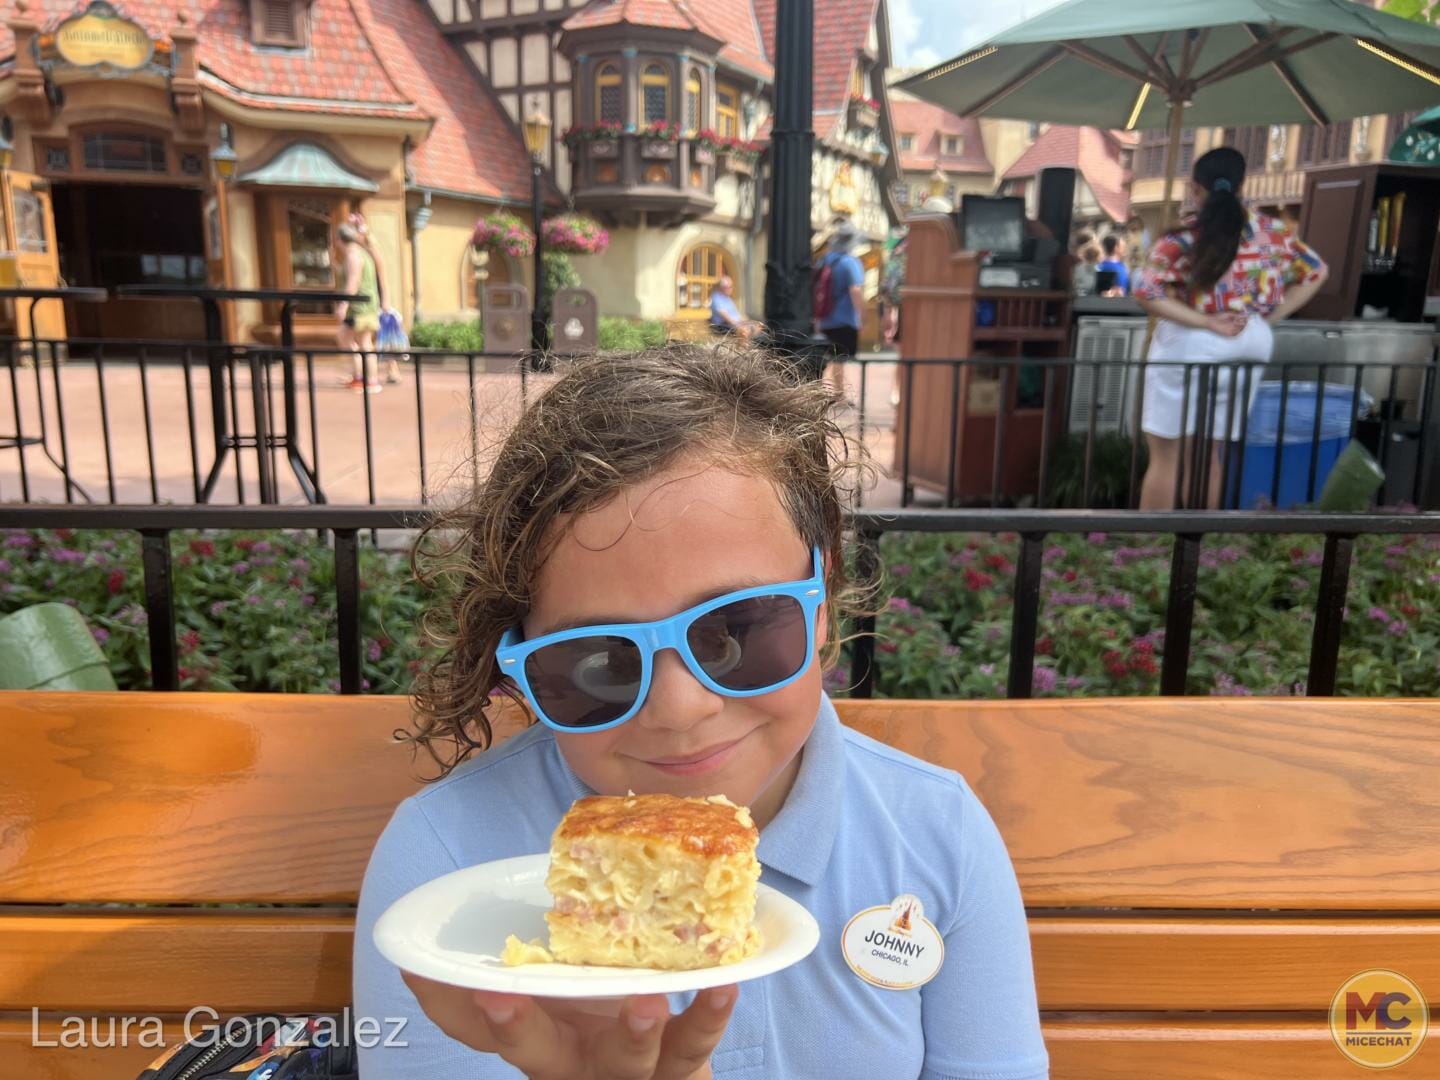 , Emile&#8217;s Fromage Montage: A Cheese Extravaganza at EPCOT